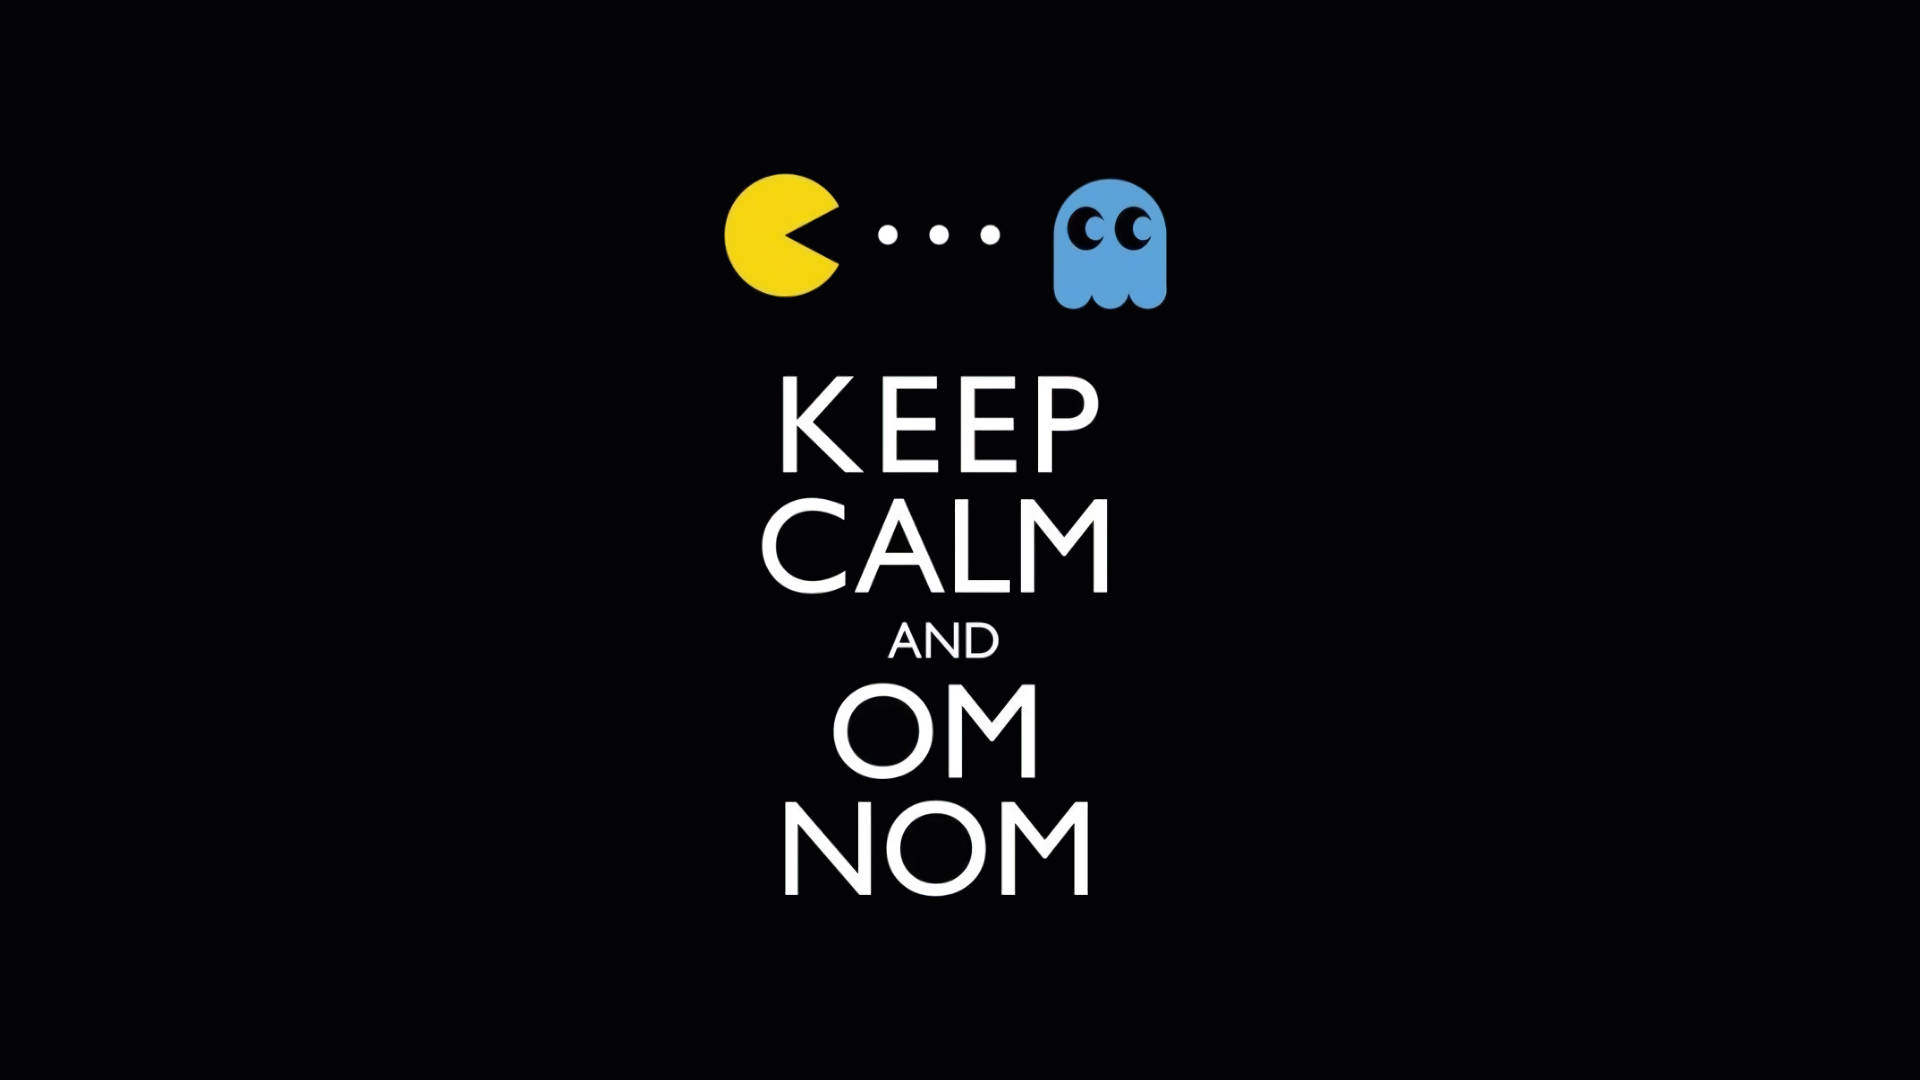 Keep Calm And Om Nom Iphone Background